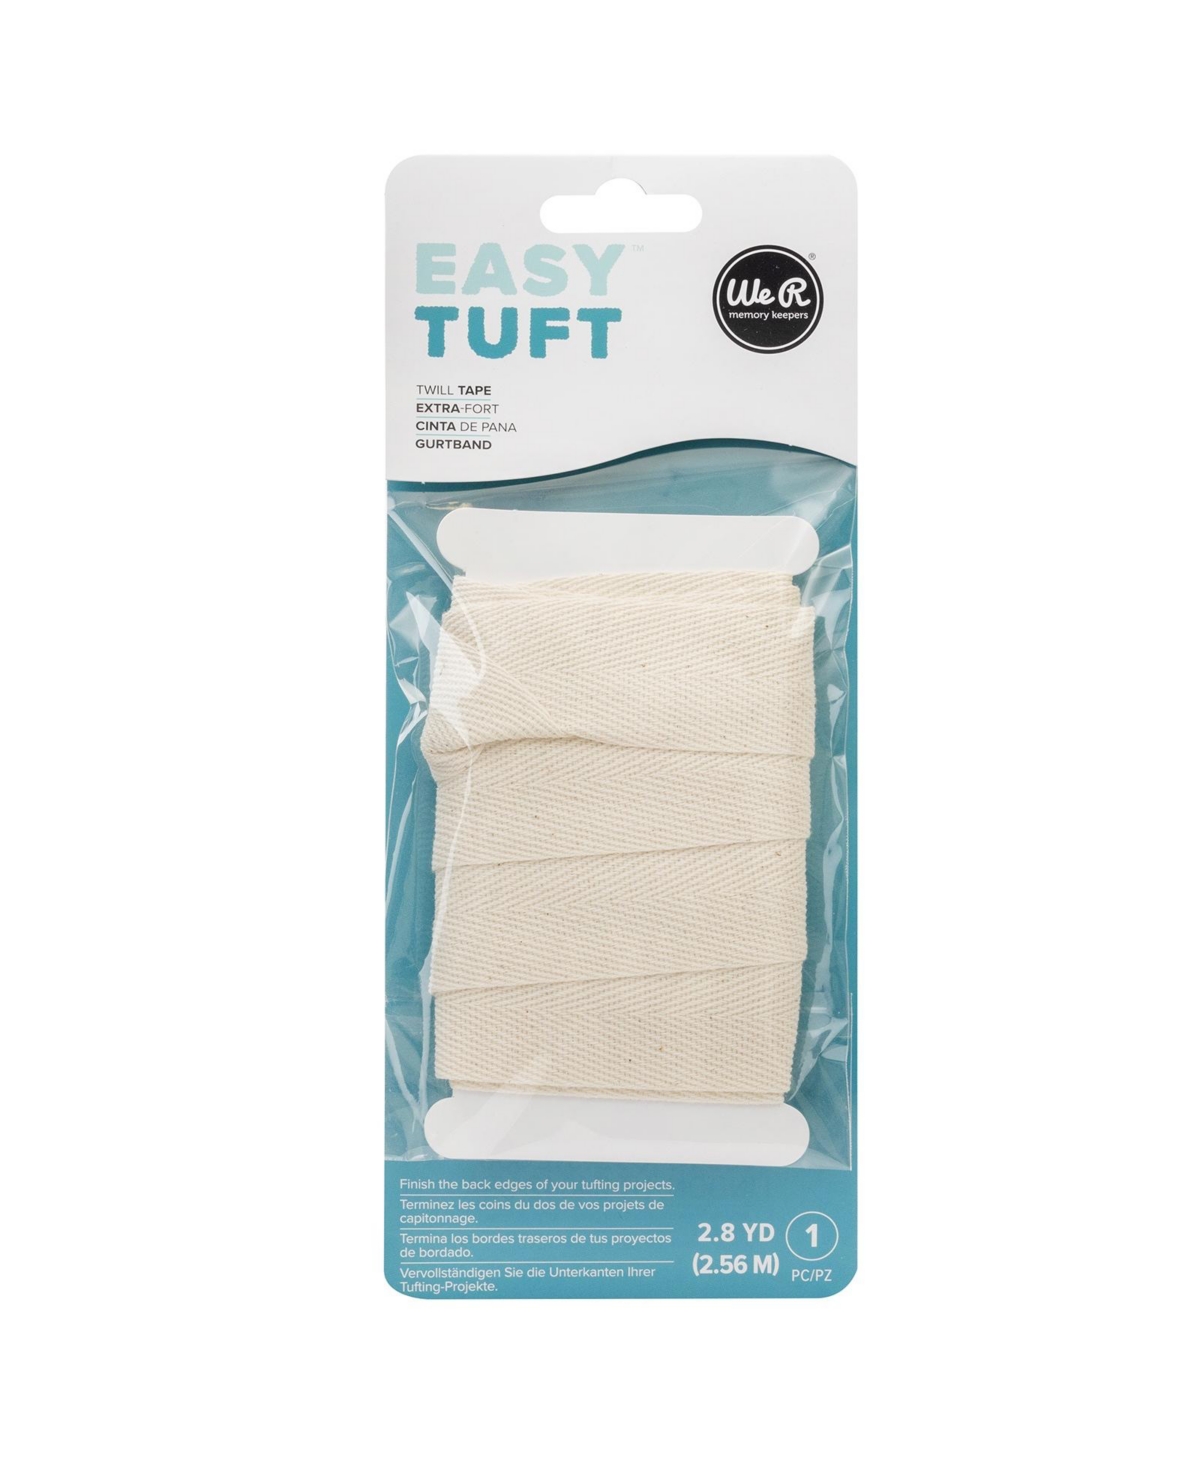 16530904 We R Memory Keepers Easy Tuft Twill Tape 2.8yd sku 16530904